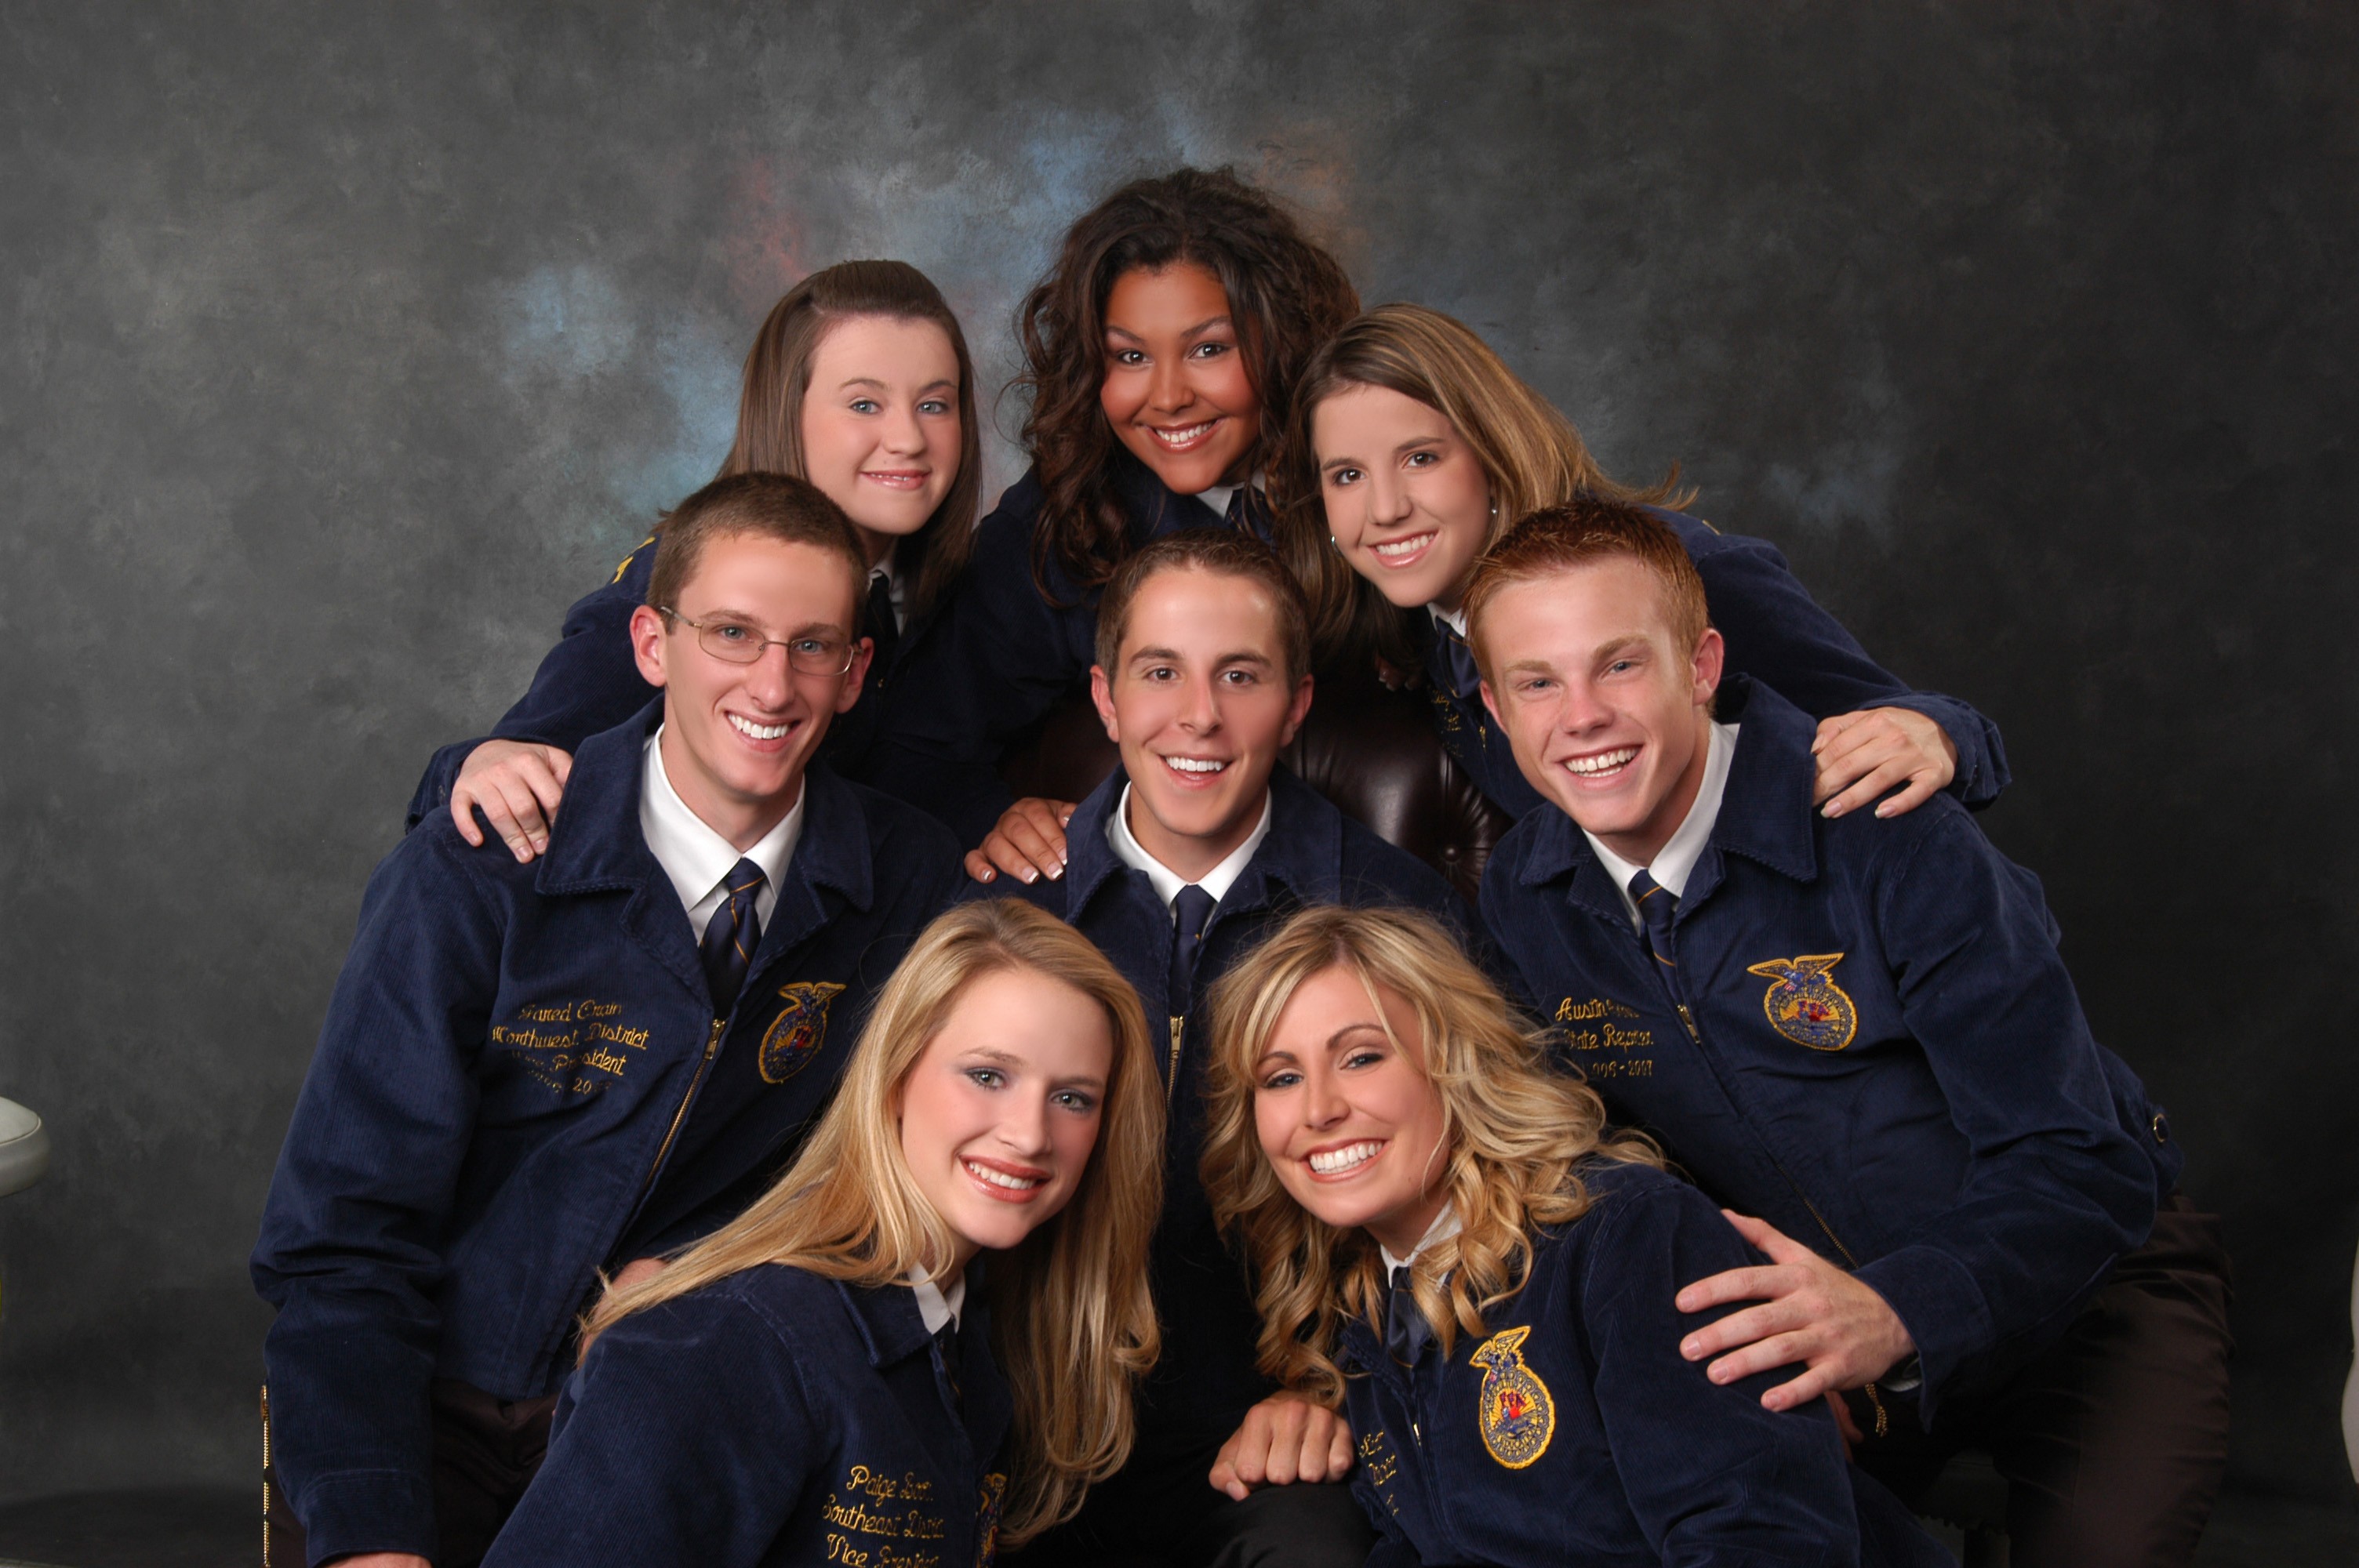 Travis Schnaithman Finalist for Star Farmer of America at Upcoming National FFA Convention.